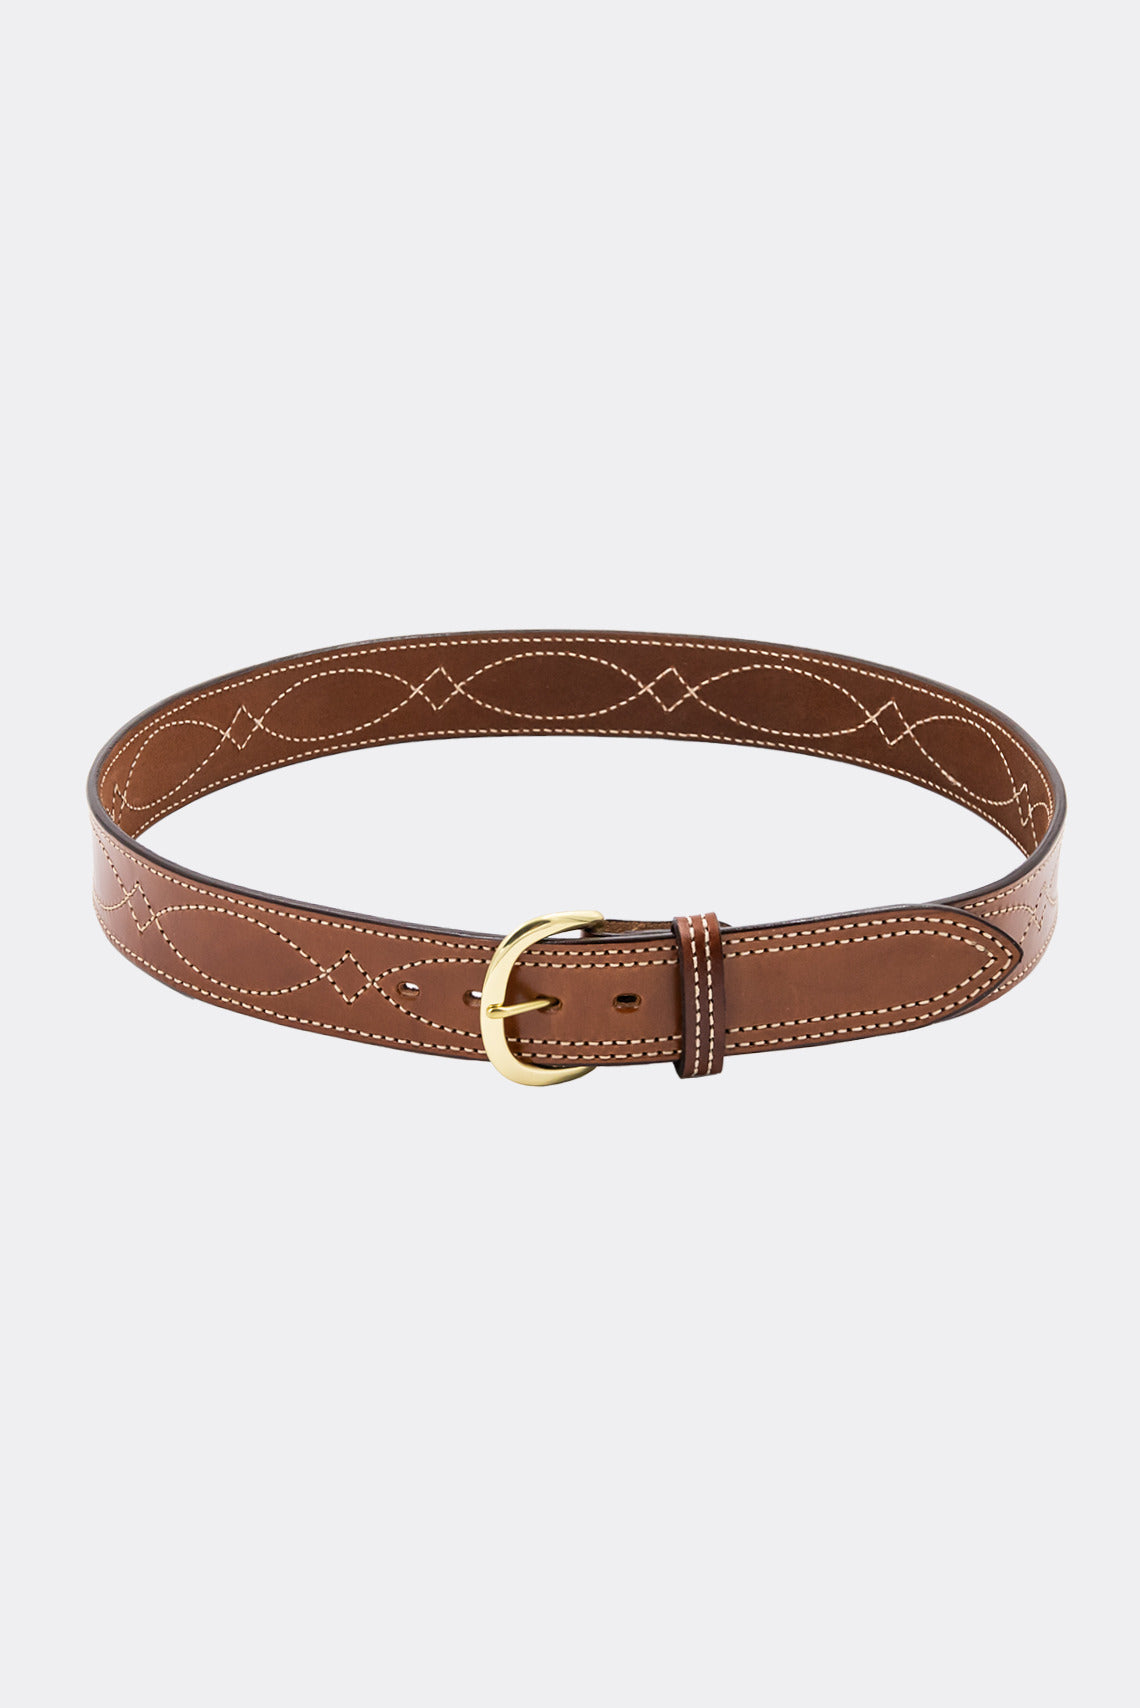 Handmade Double Stitched Leather Belt in Waxed Tan with White Stitching  (order one size larger than the waist) - Spencer's Western World